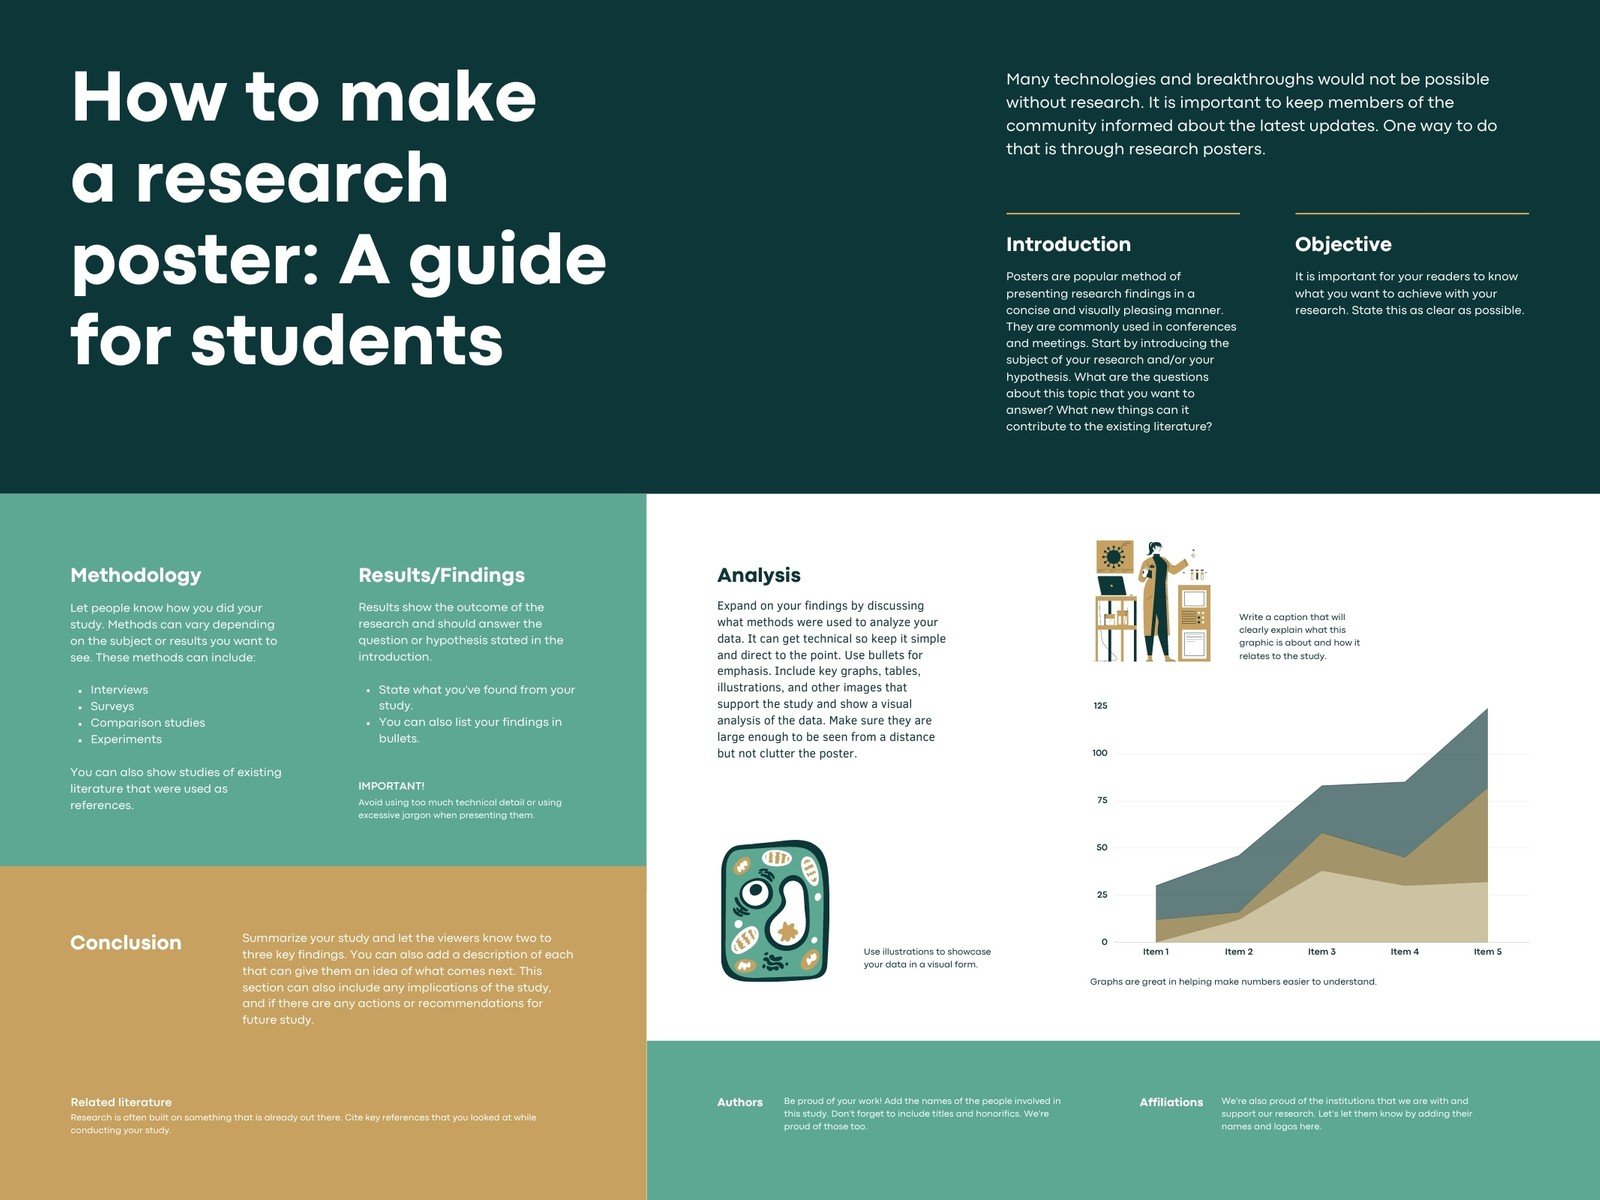 Research Poster Template Canva